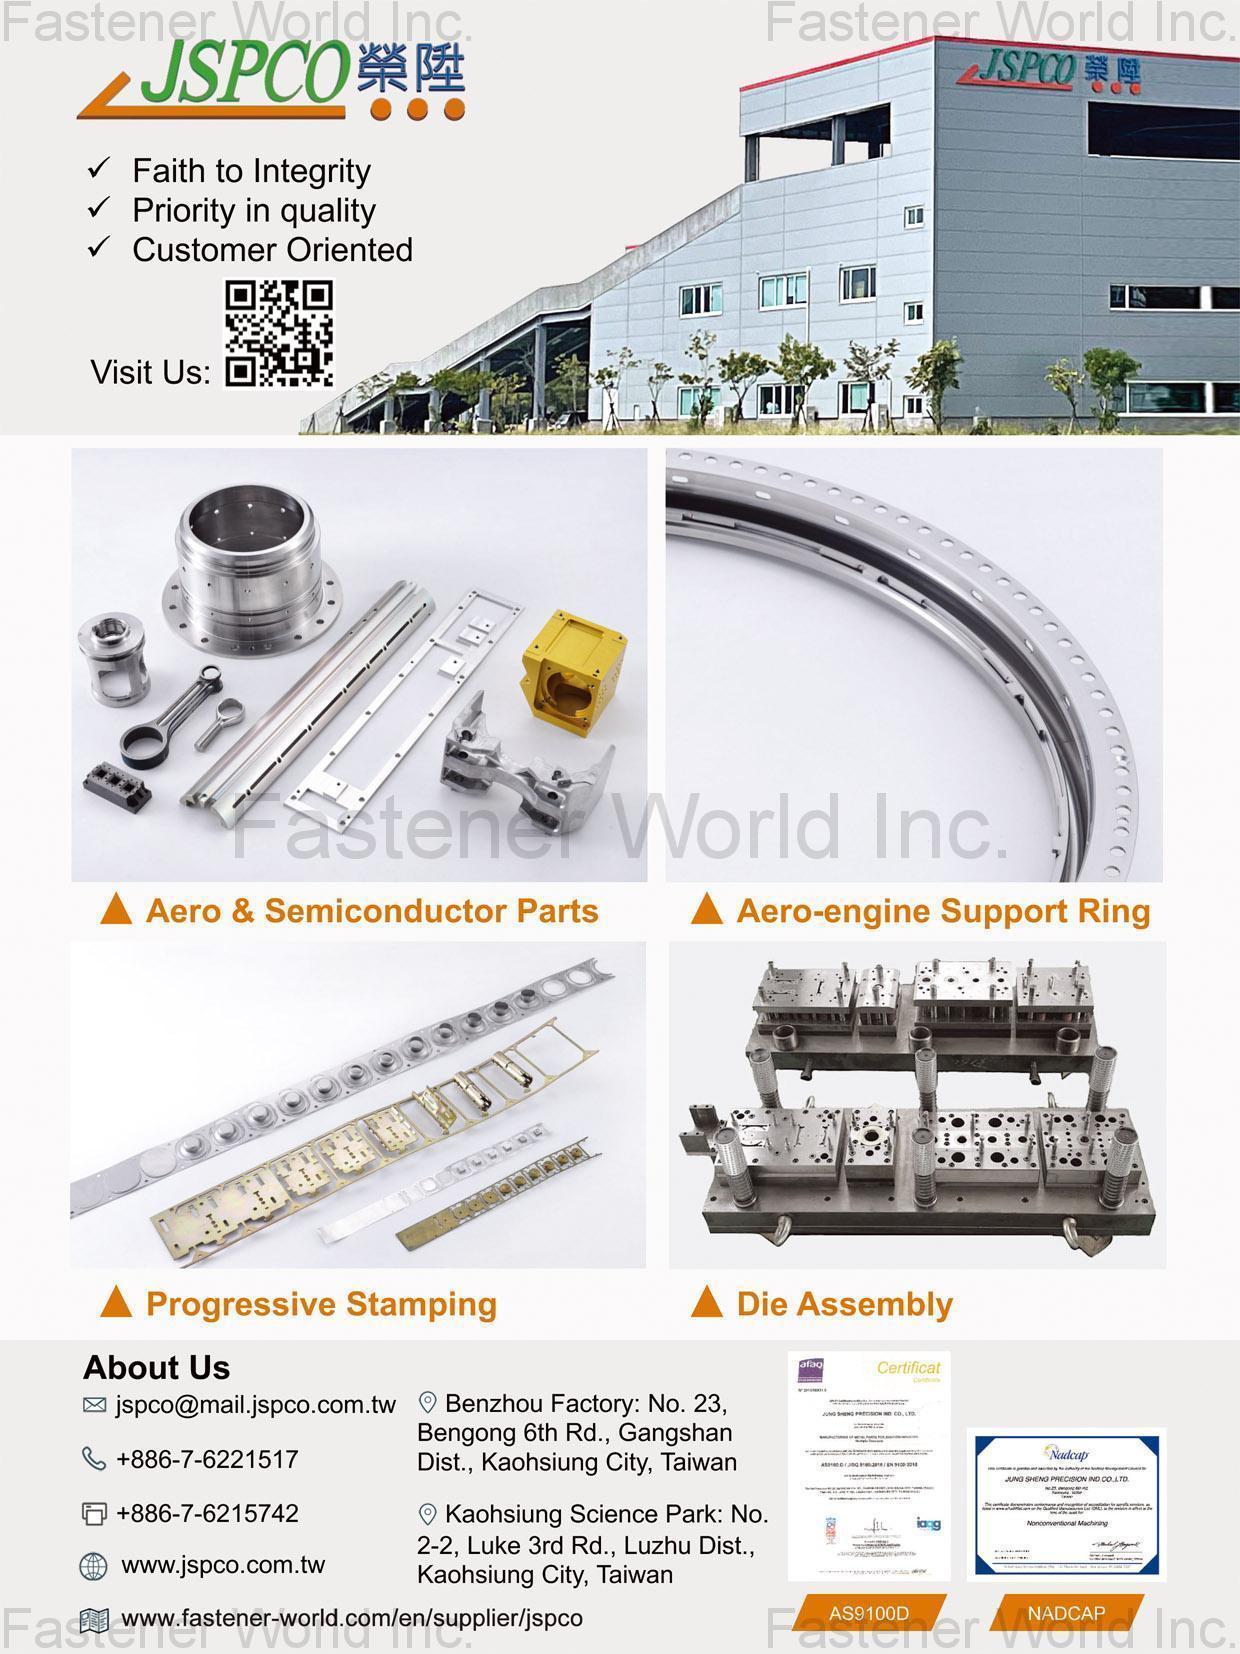 JUNG SHENG PRECISION IND. CO., LTD. , Aero & Semiconductor Parts, Aero-engine Support Ring, Progressive Stamping, Die Assembly